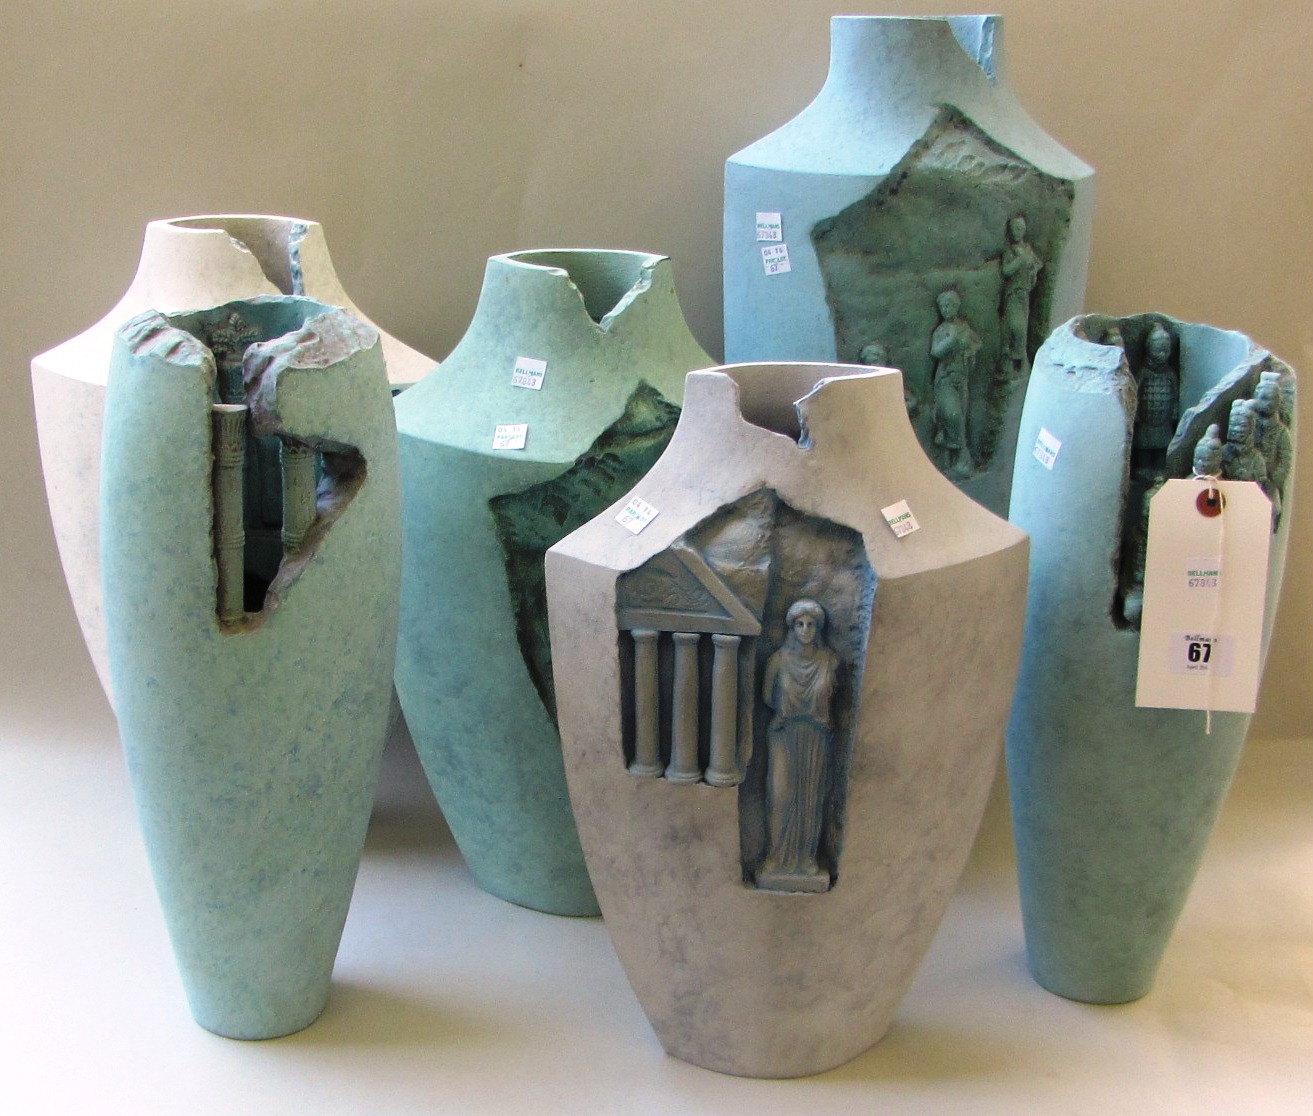 A group of six Amanda King ceramic vases, circa 1992/93, decorated in an archeological style with